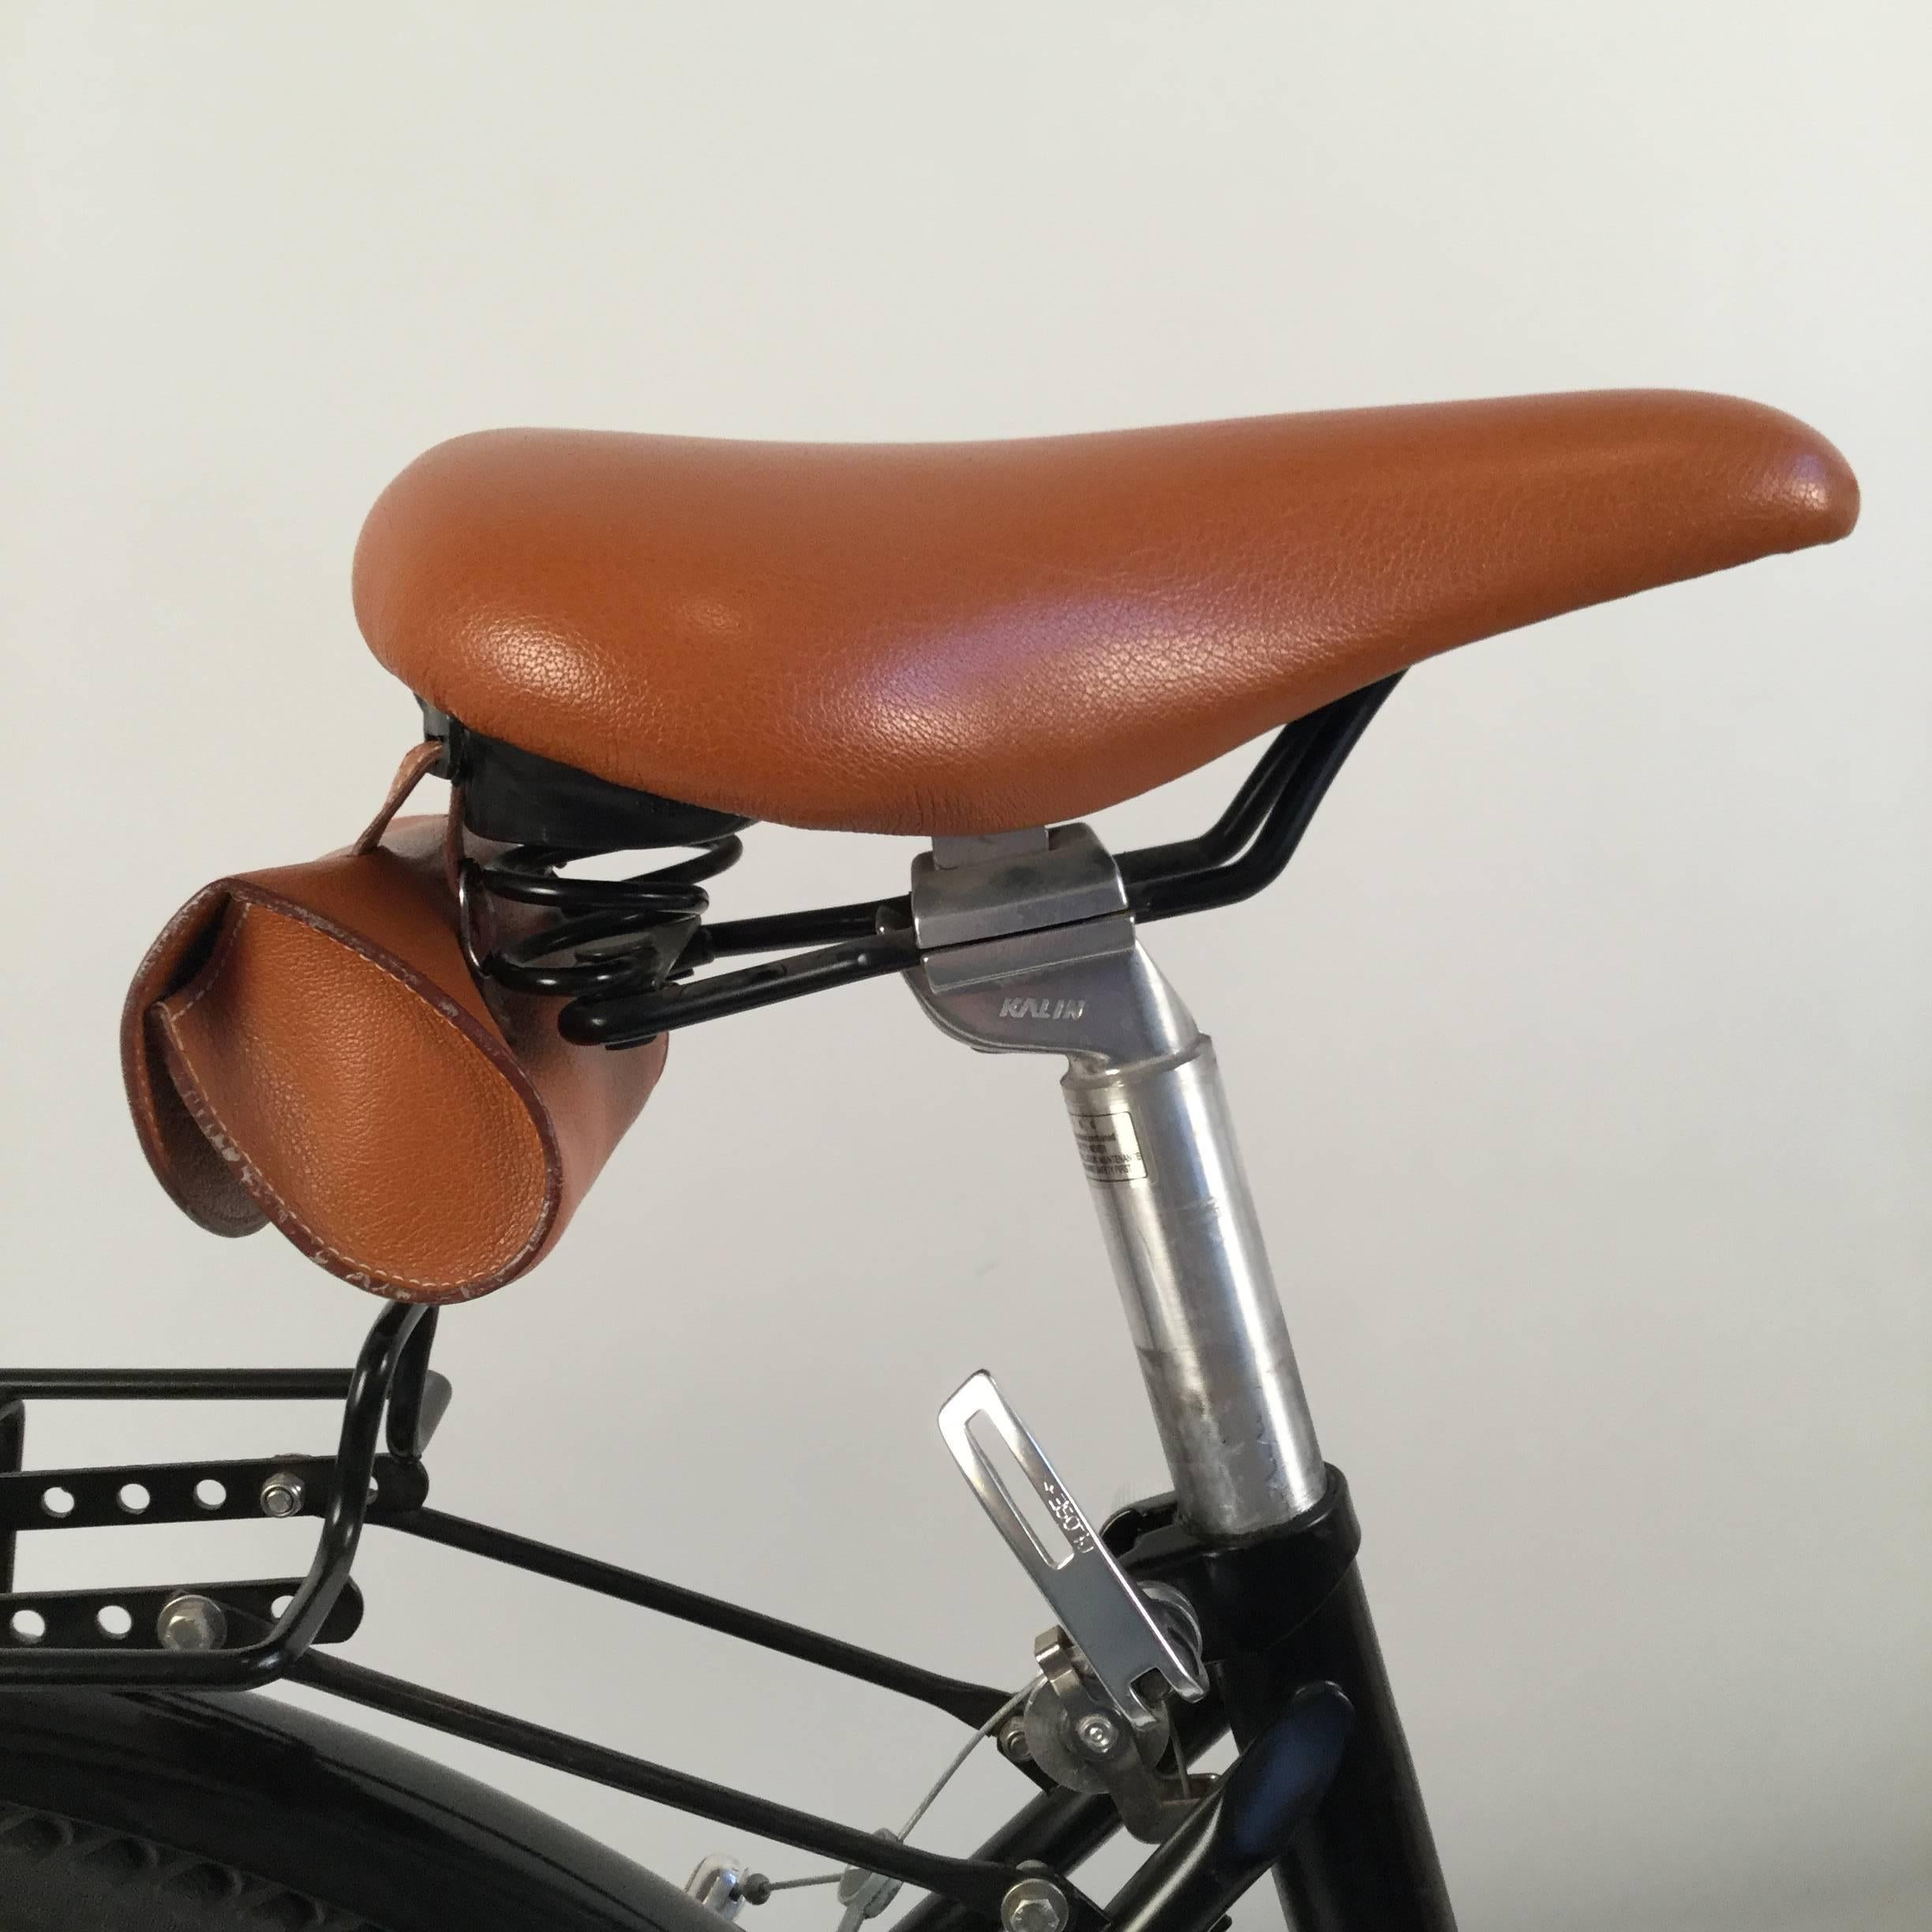 1994 Women’s Bicycle, produced by Hermès in co-operation with Peugeot. Saddle, Frame, Handles and Saddlebag are covered with 